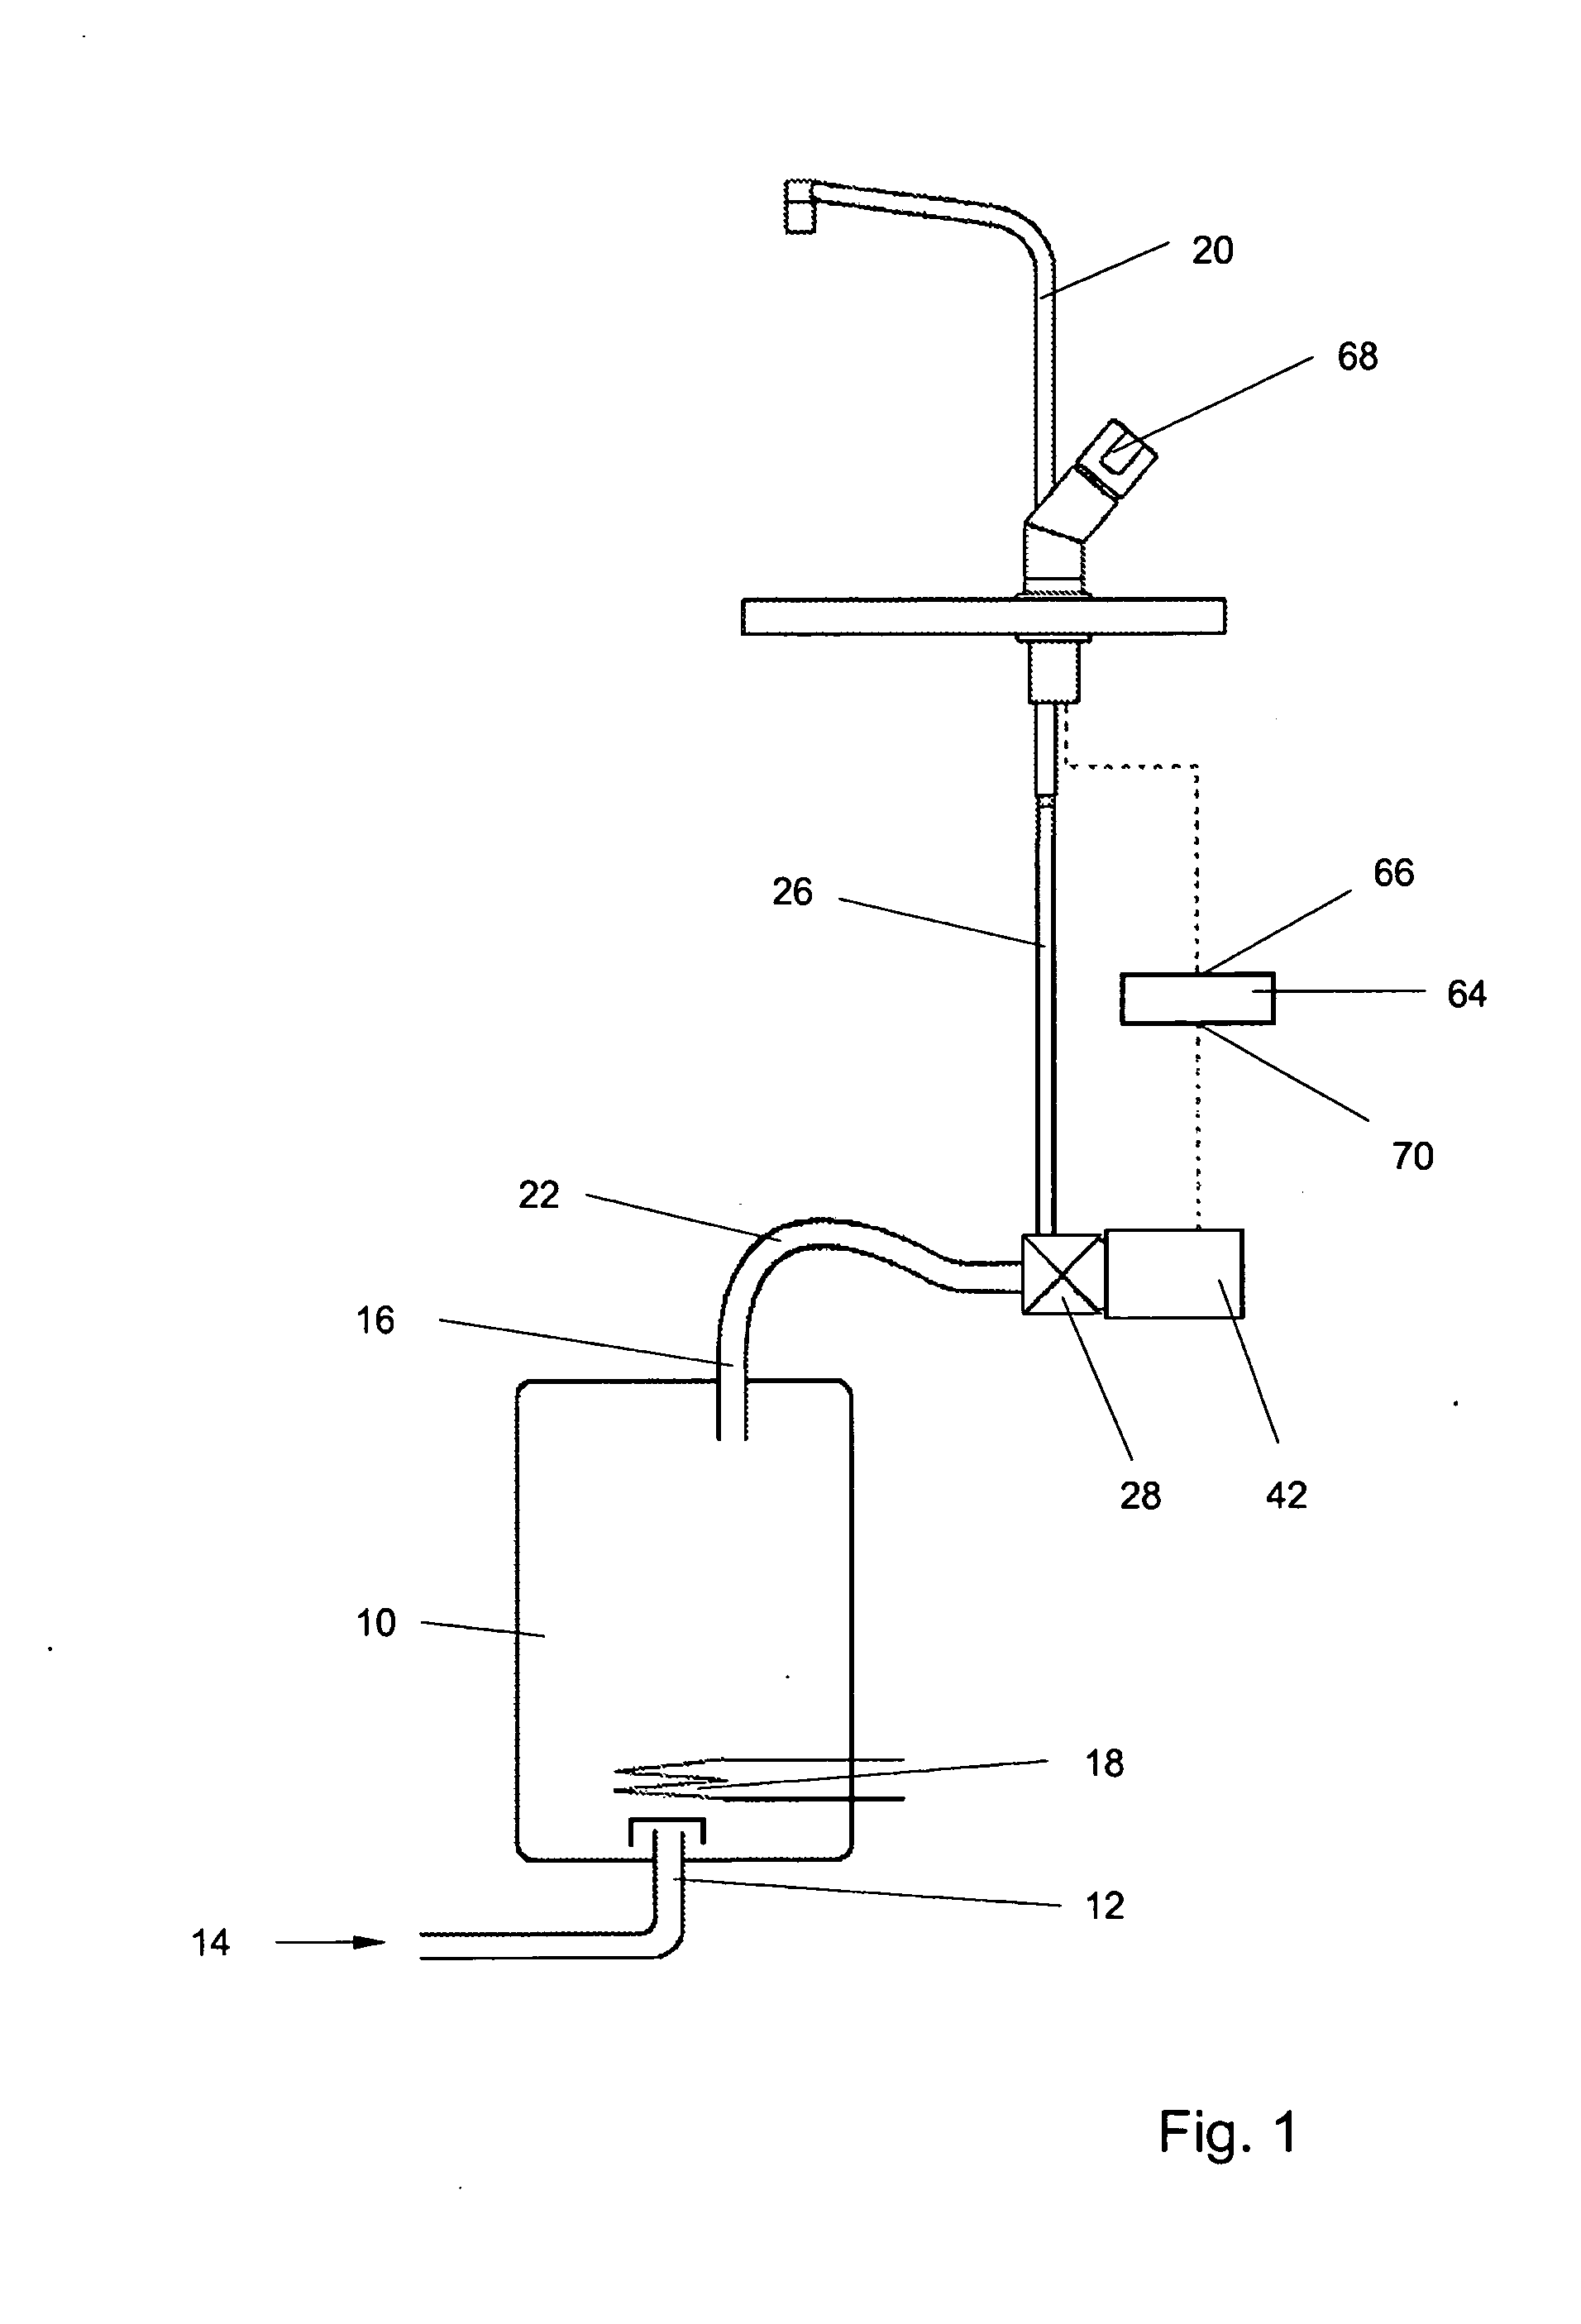 Apparatus for dispensing hot or boiling water